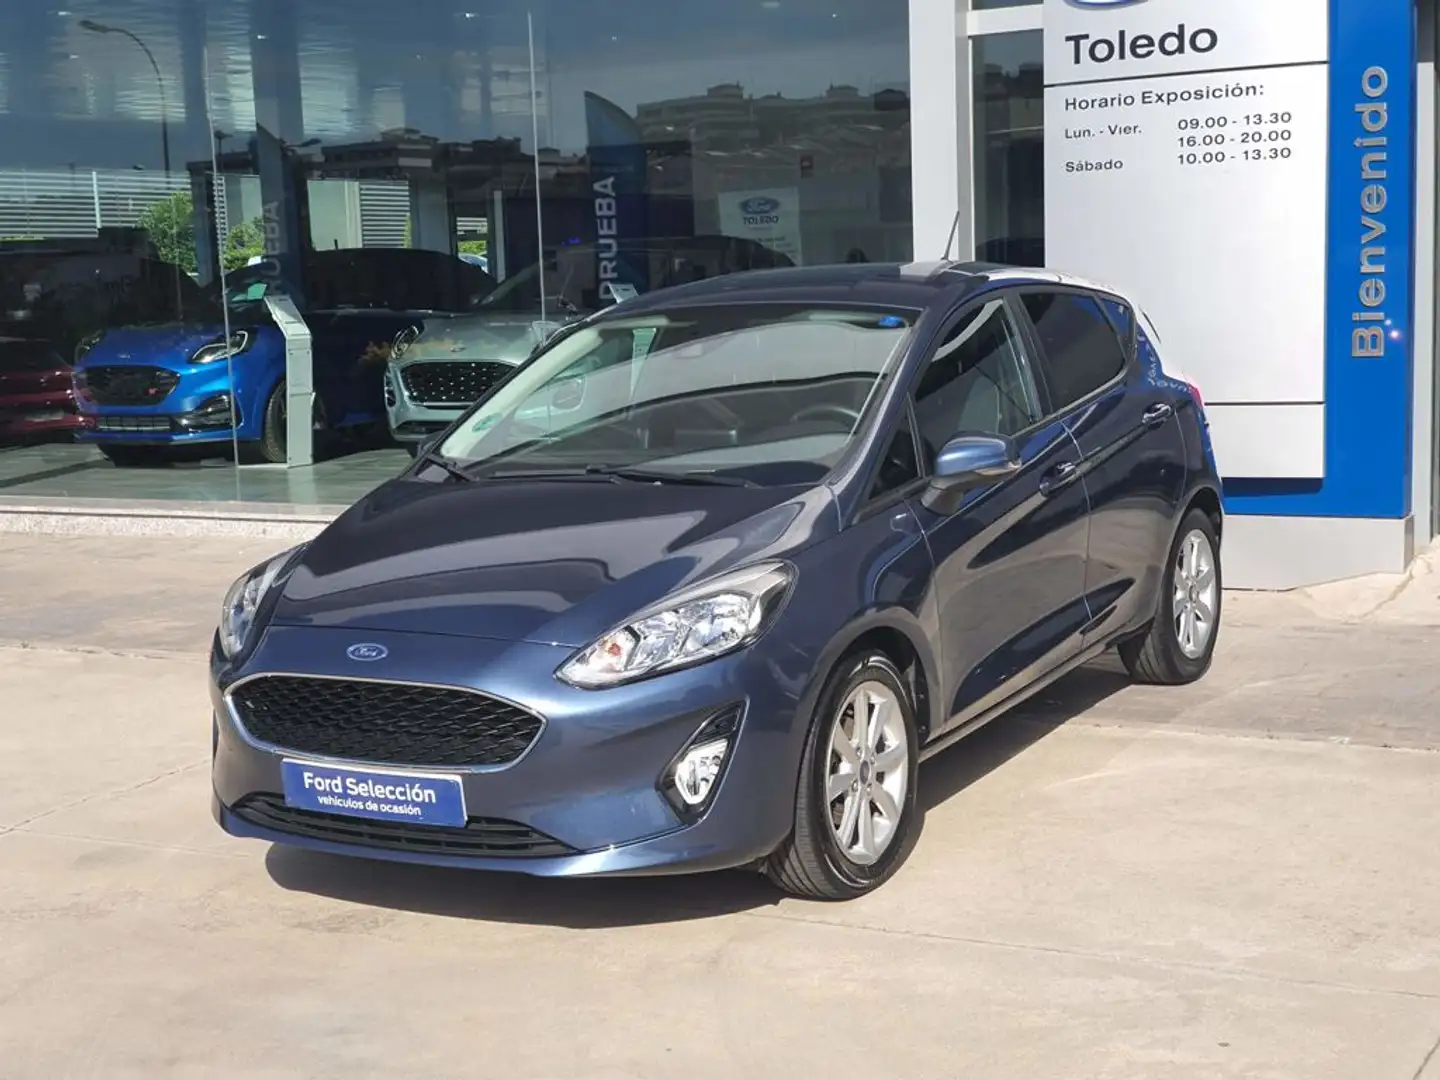 Ford Fiesta 1.1 Ti-VCT Trend+ - 1